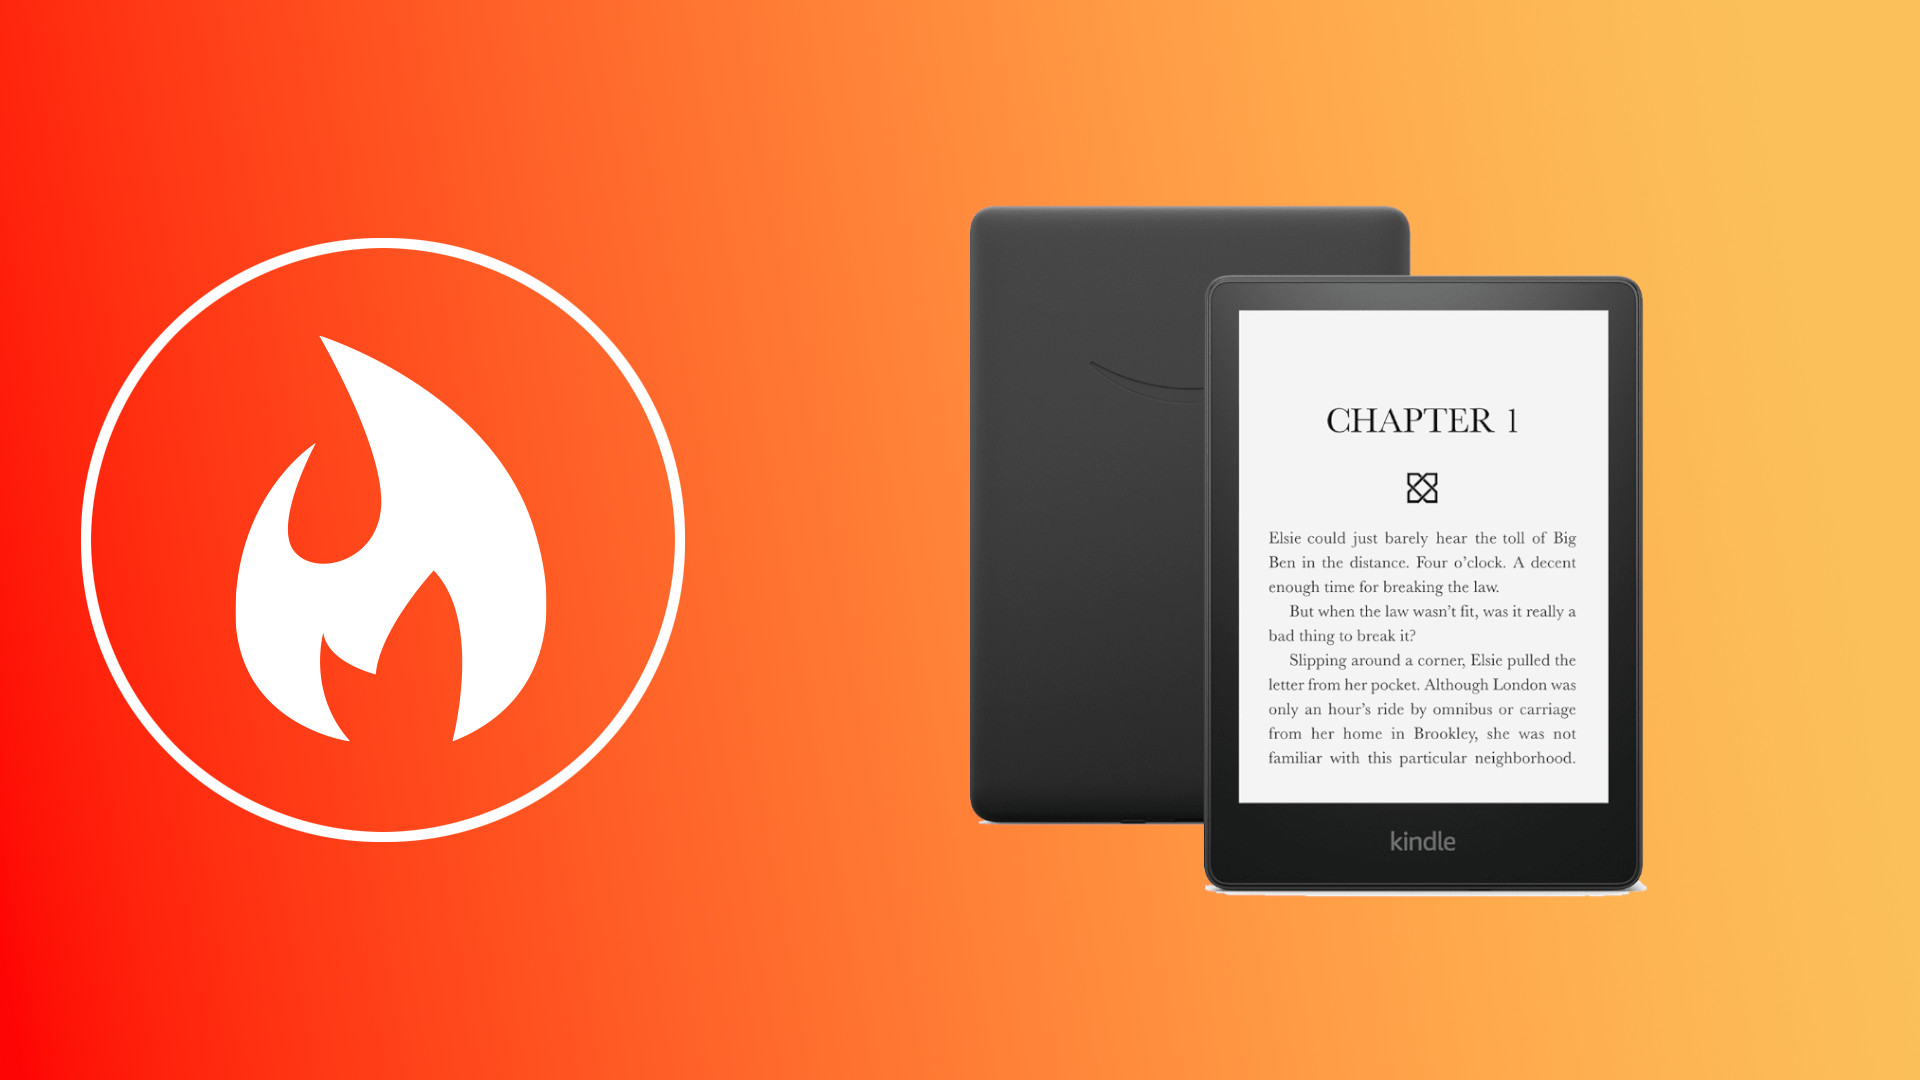 Kindle Paperwhite on orange background with fire symbol